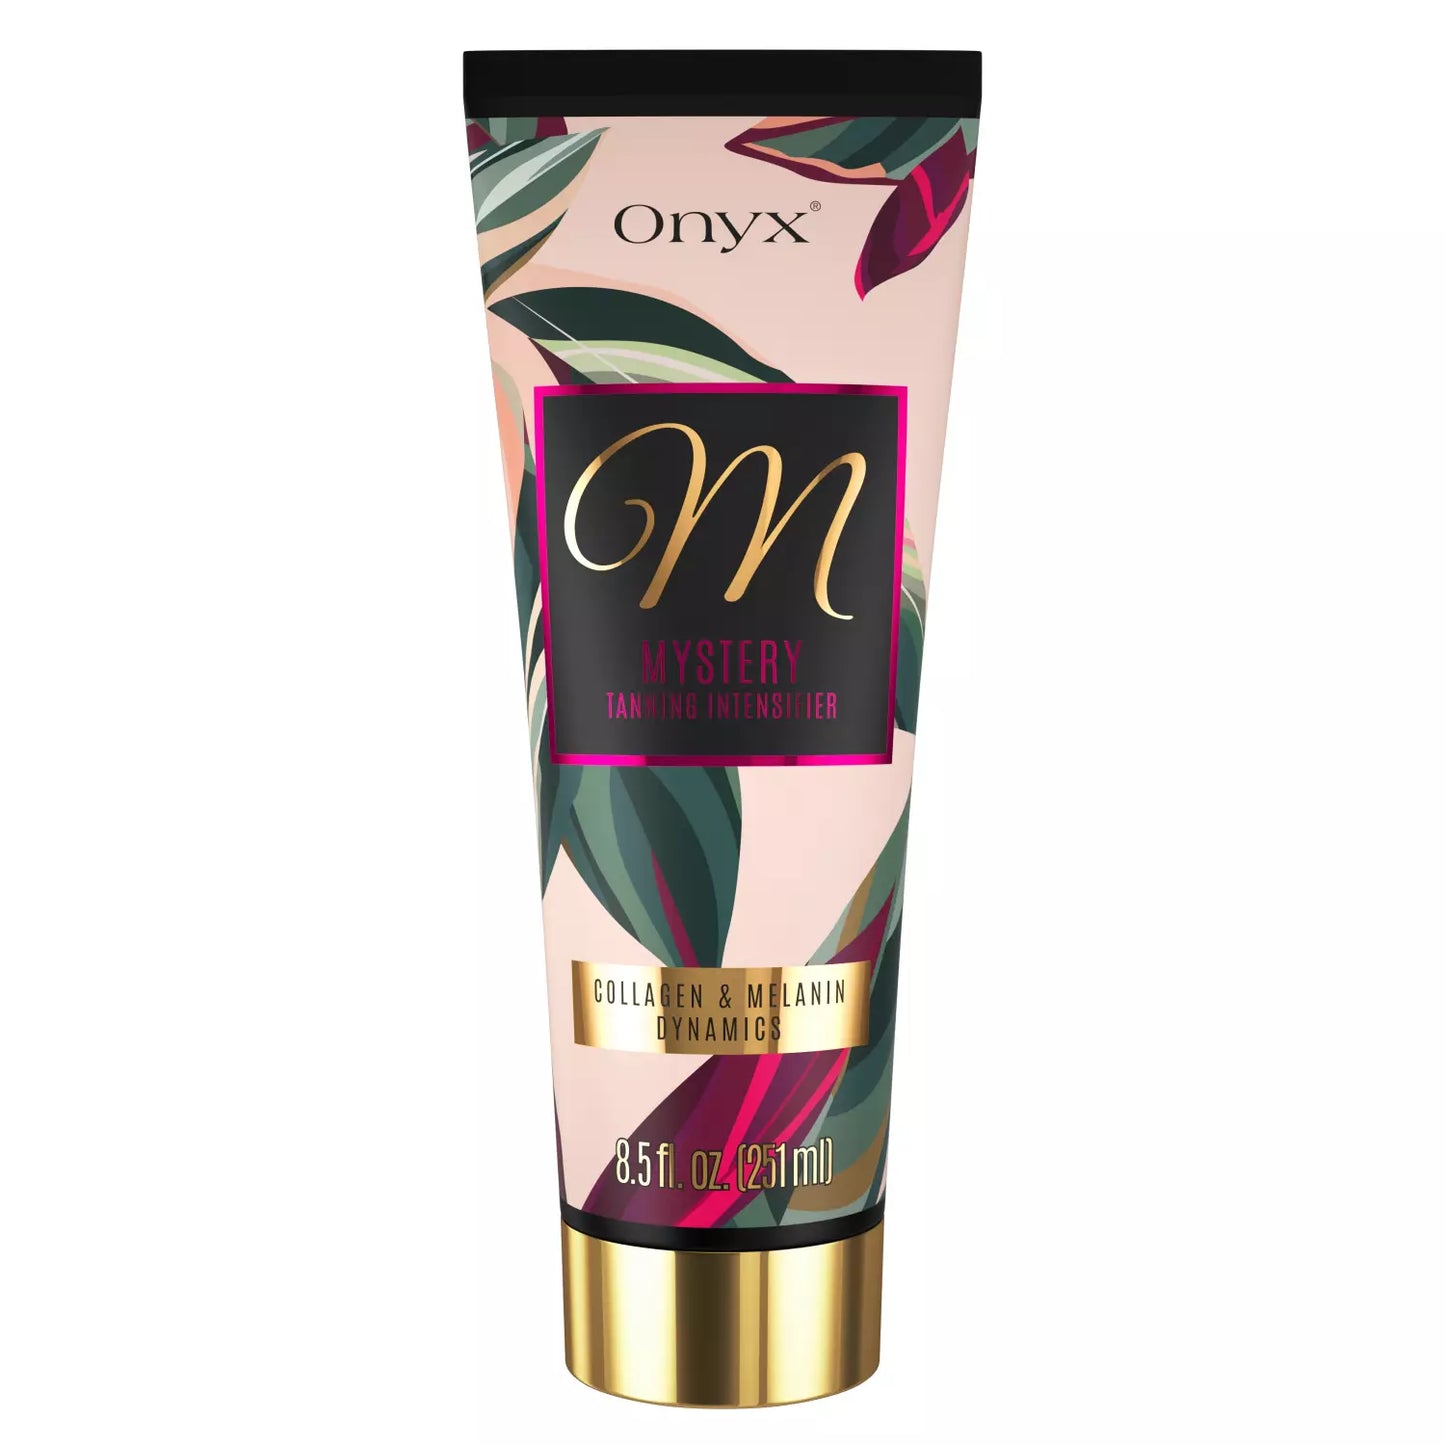 Mystery tanning intensifier with collagen and melanin dynamics